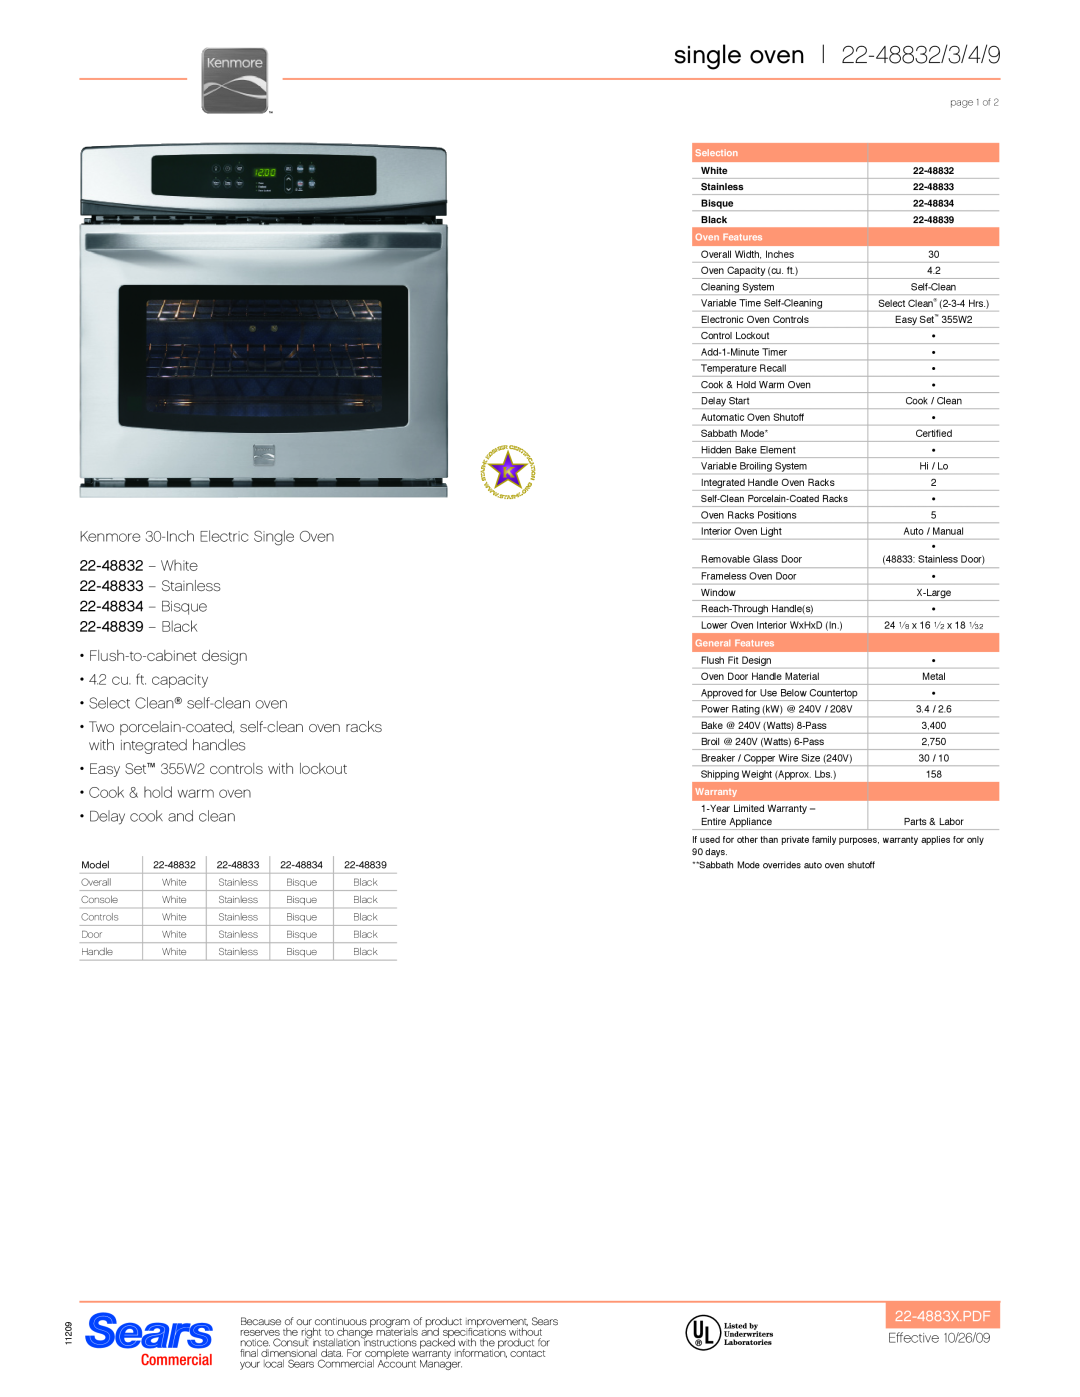 Kenmore 22-48833 installation instructions single oven 22-48832/3/4/9, Stainless 22-48834 - Bisque 22-48839 - Black 